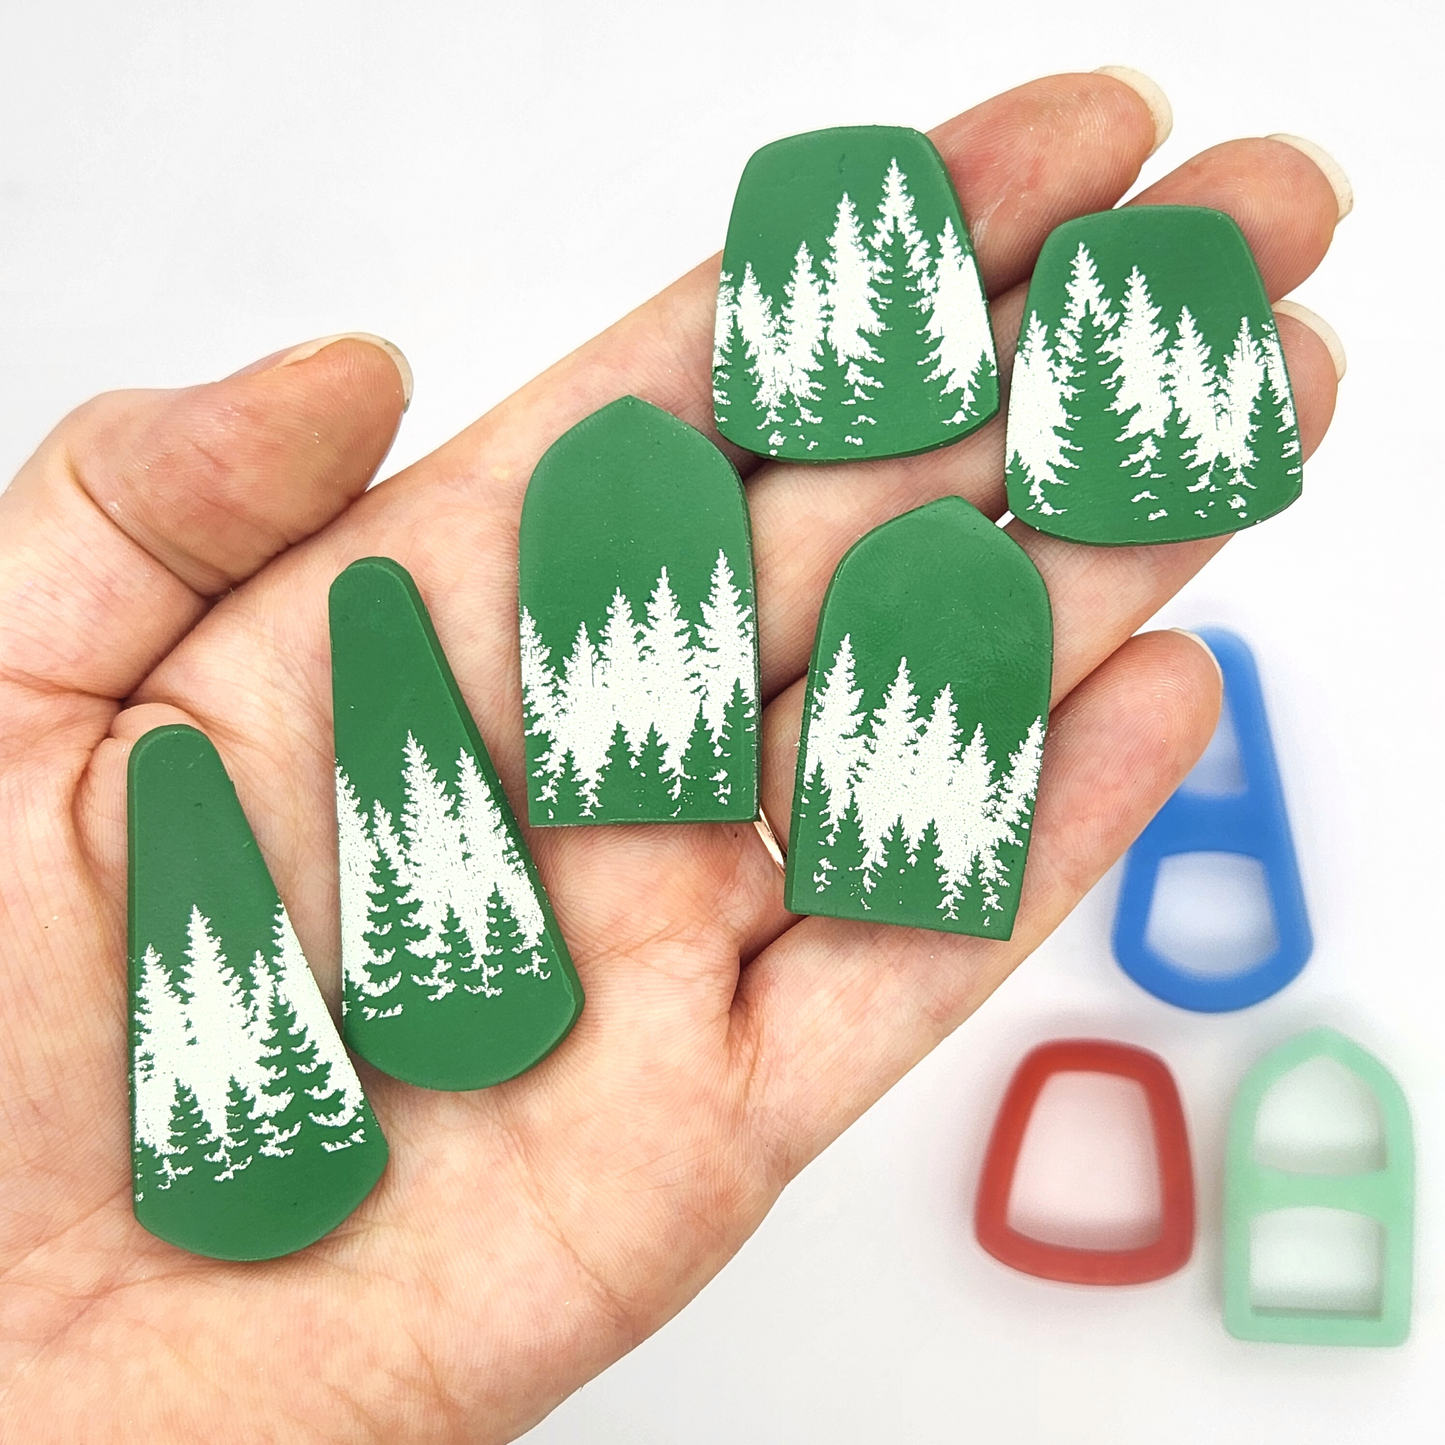 Forrest Tree Silkscreen Stencil for Polymer Clay Earring Jewelry Pendant Charm Ornament